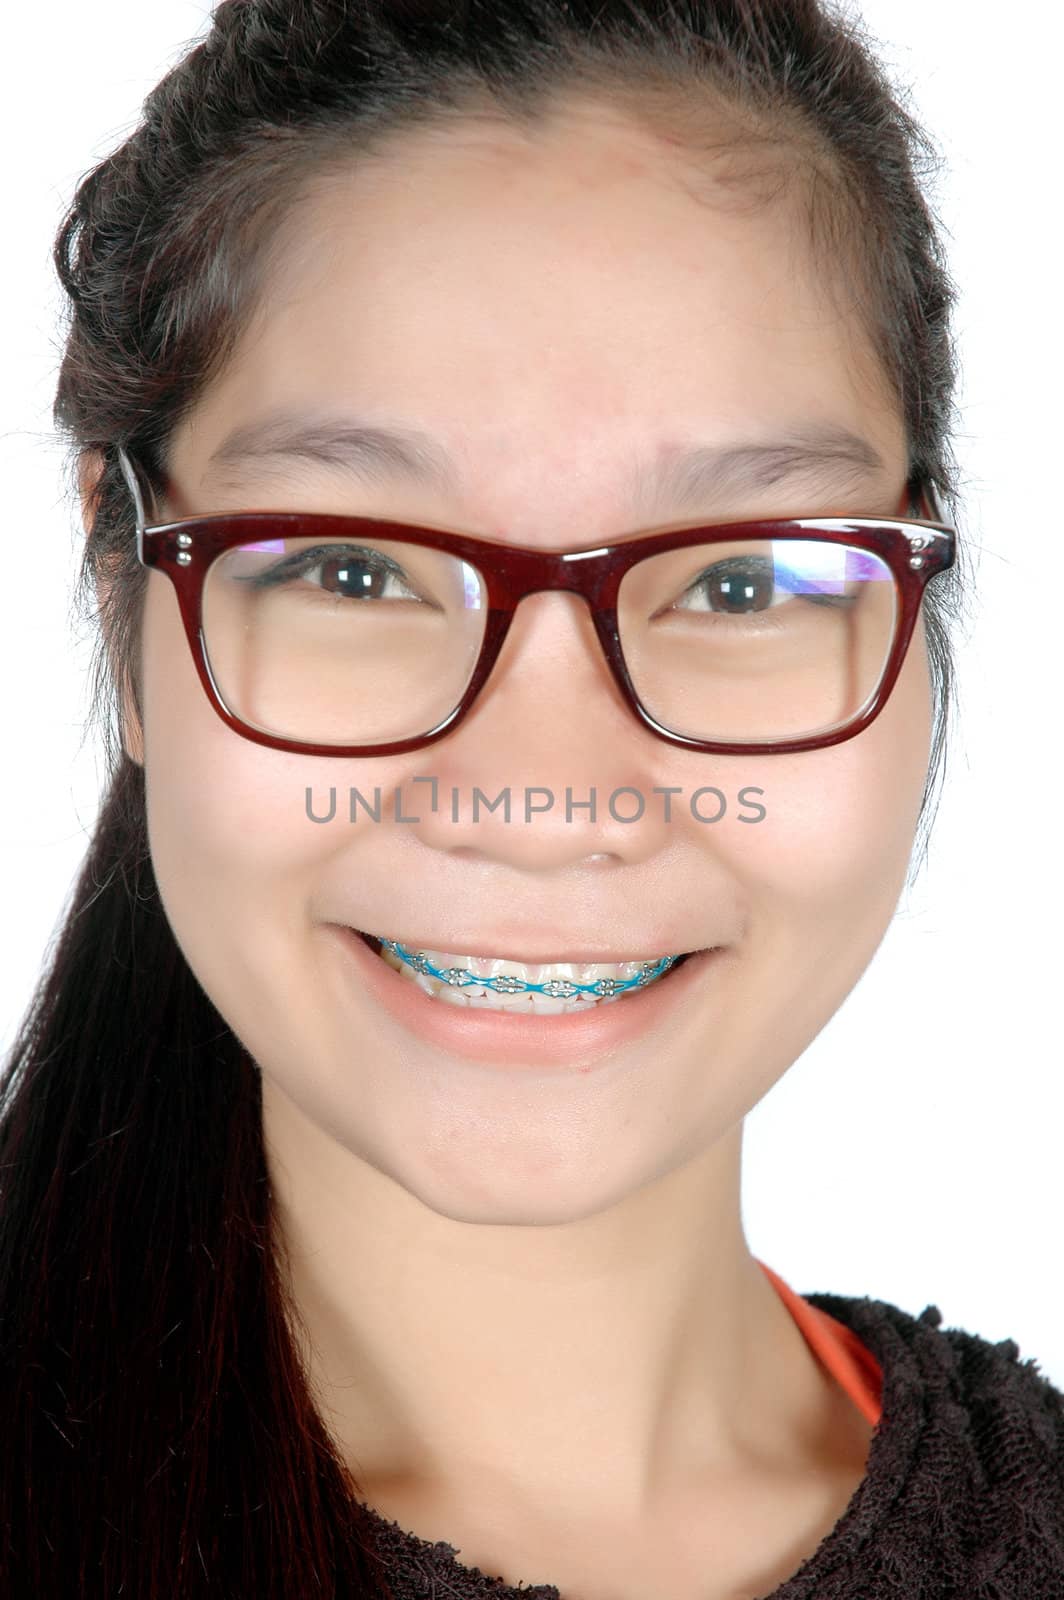 portrait of asian young girl with glasses and braces isolated on white background